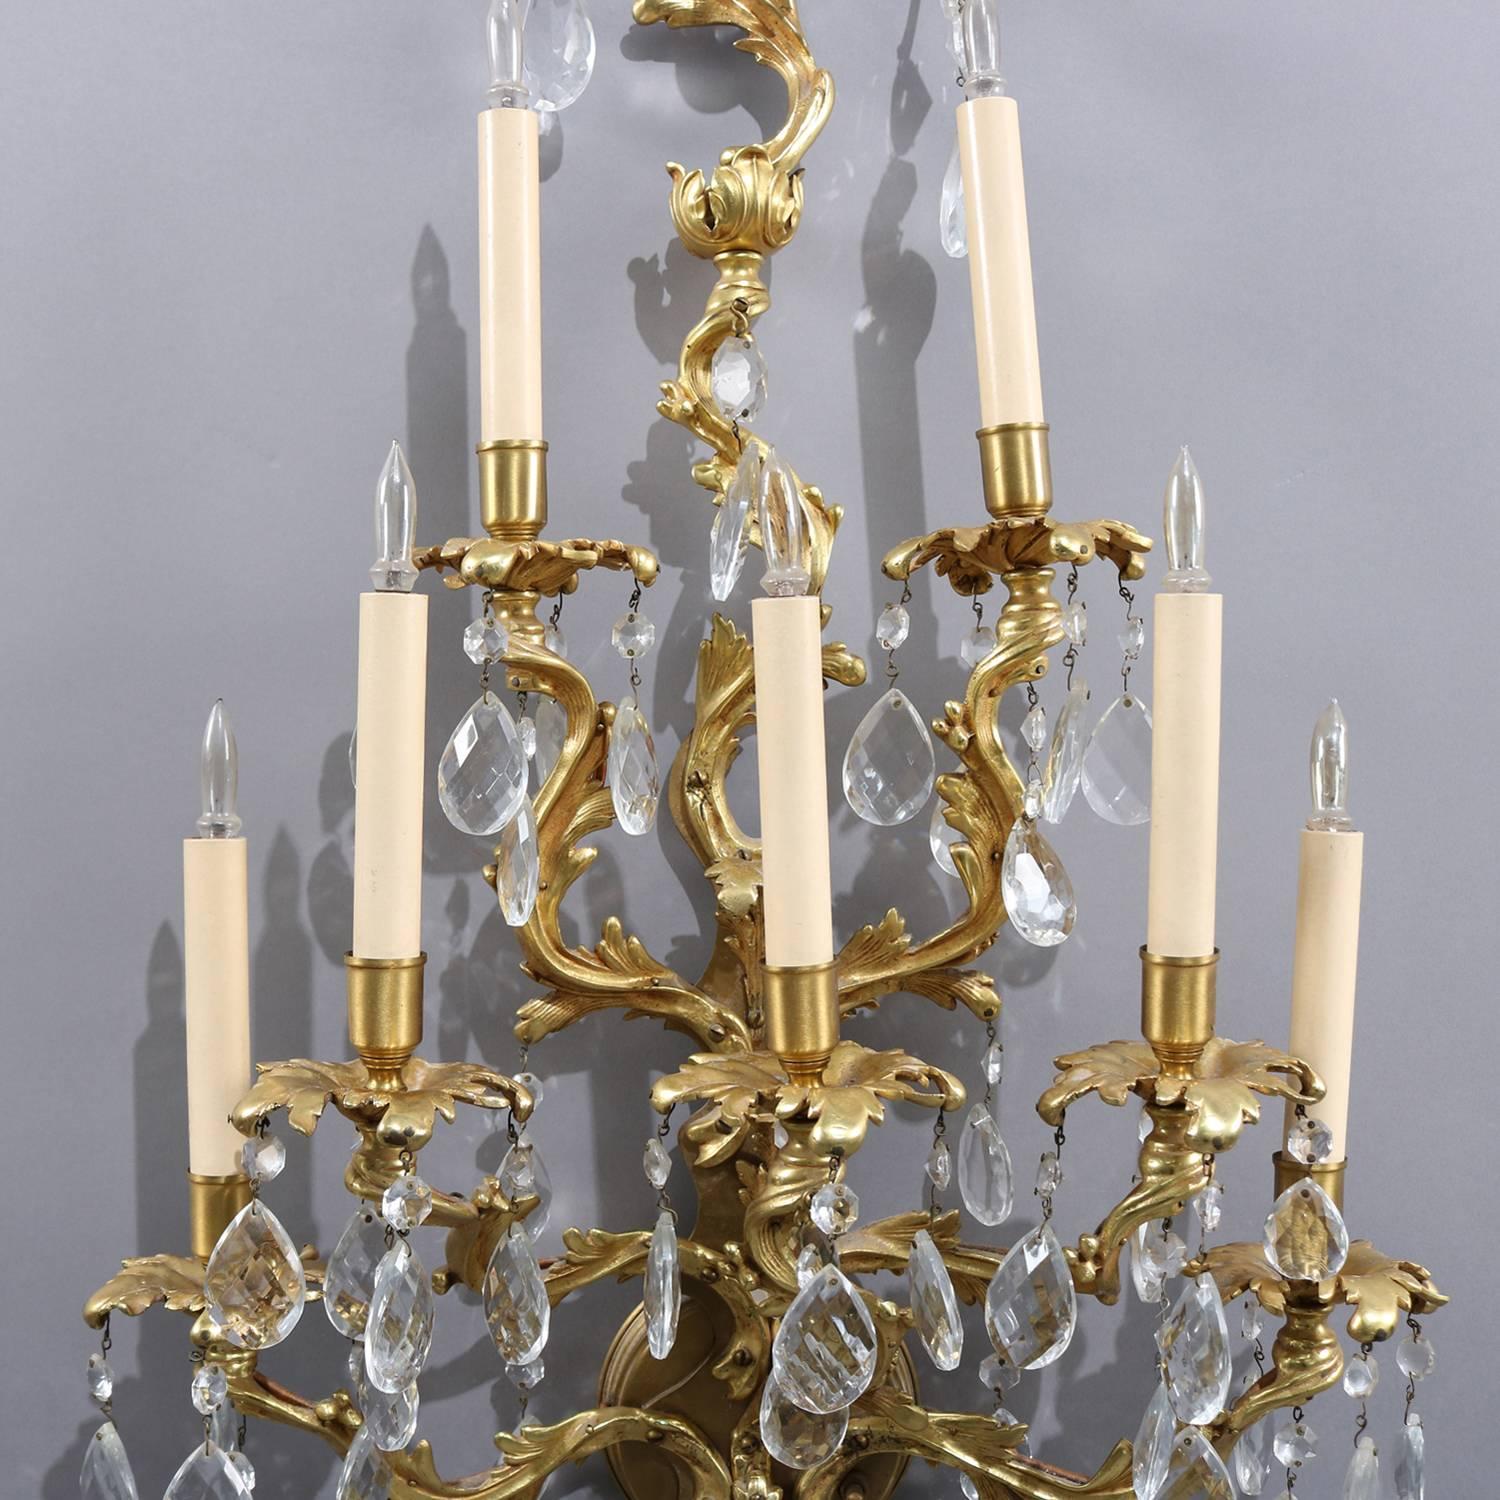 20th Century Oversized French Rococo Foliate Form Gilt Bronze Cut Crystal Wall Sconces